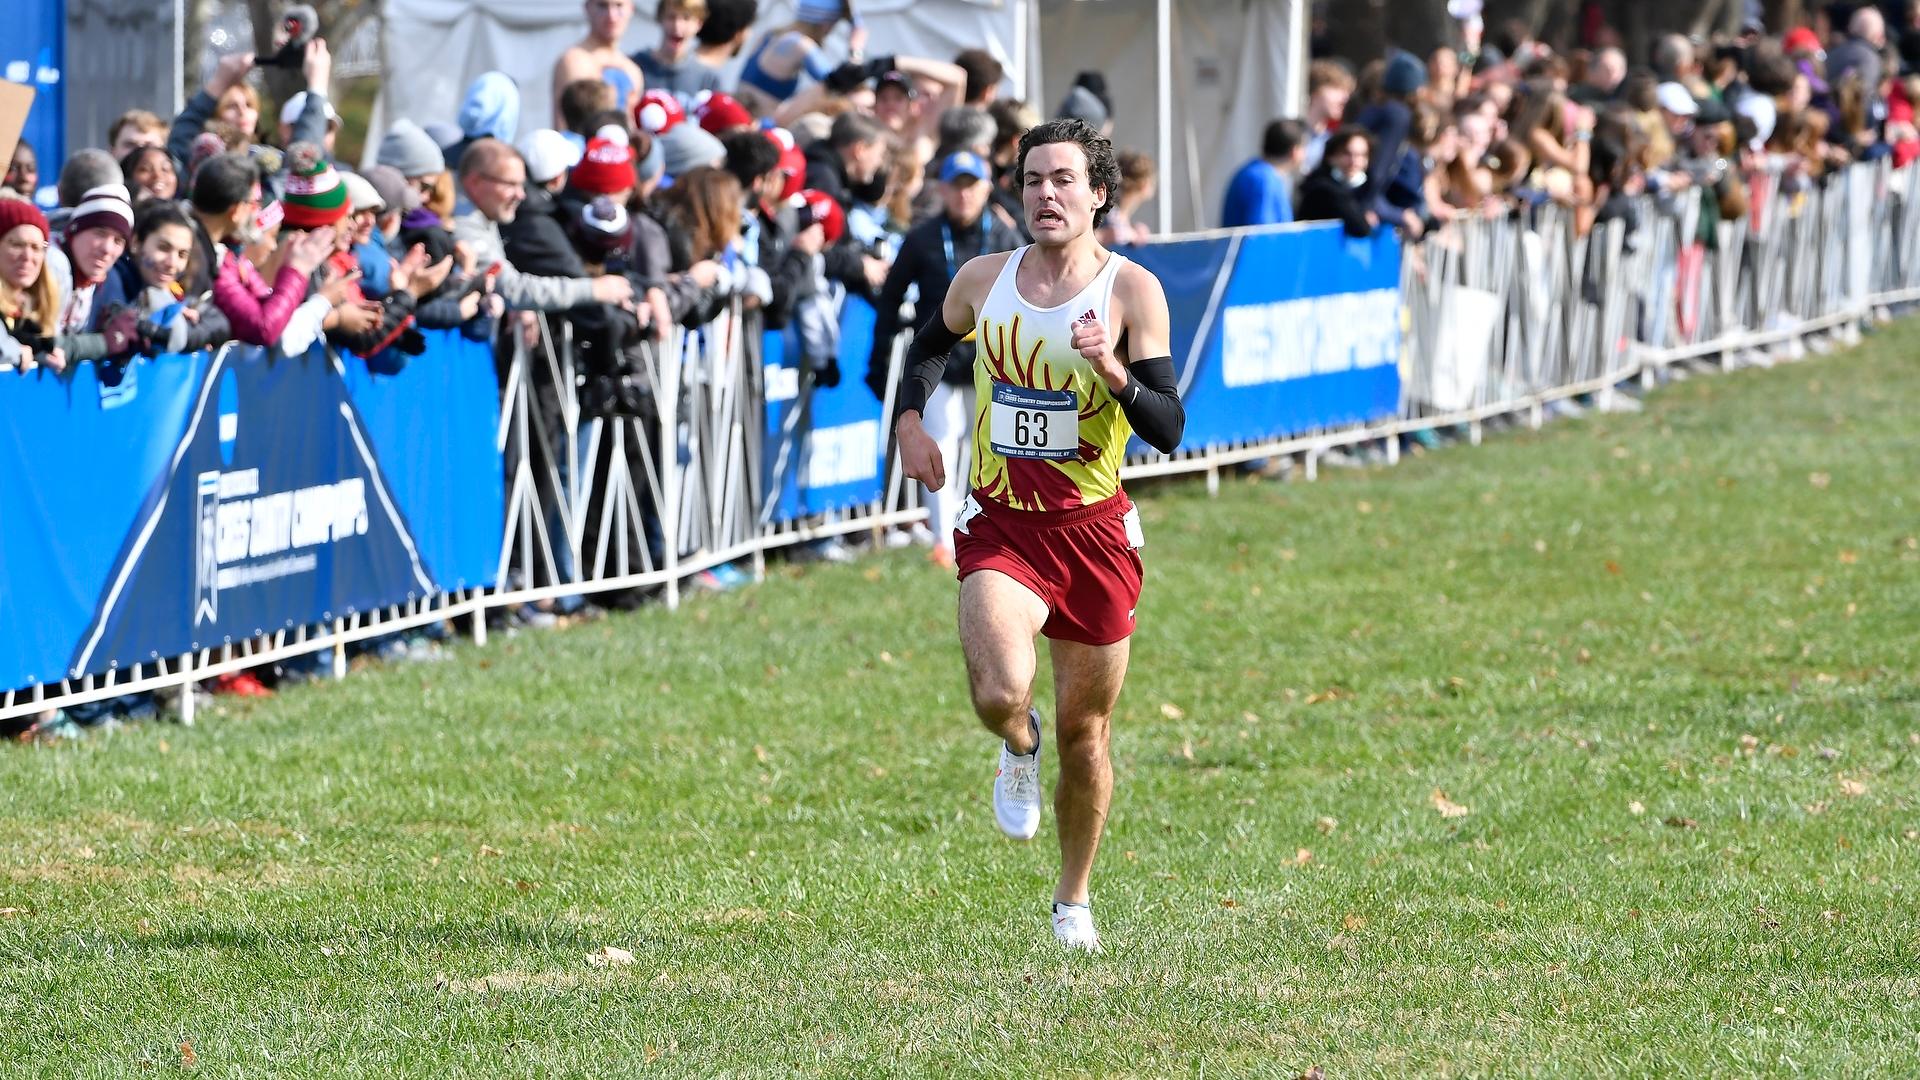 Henry Pick finished third last year at nationals